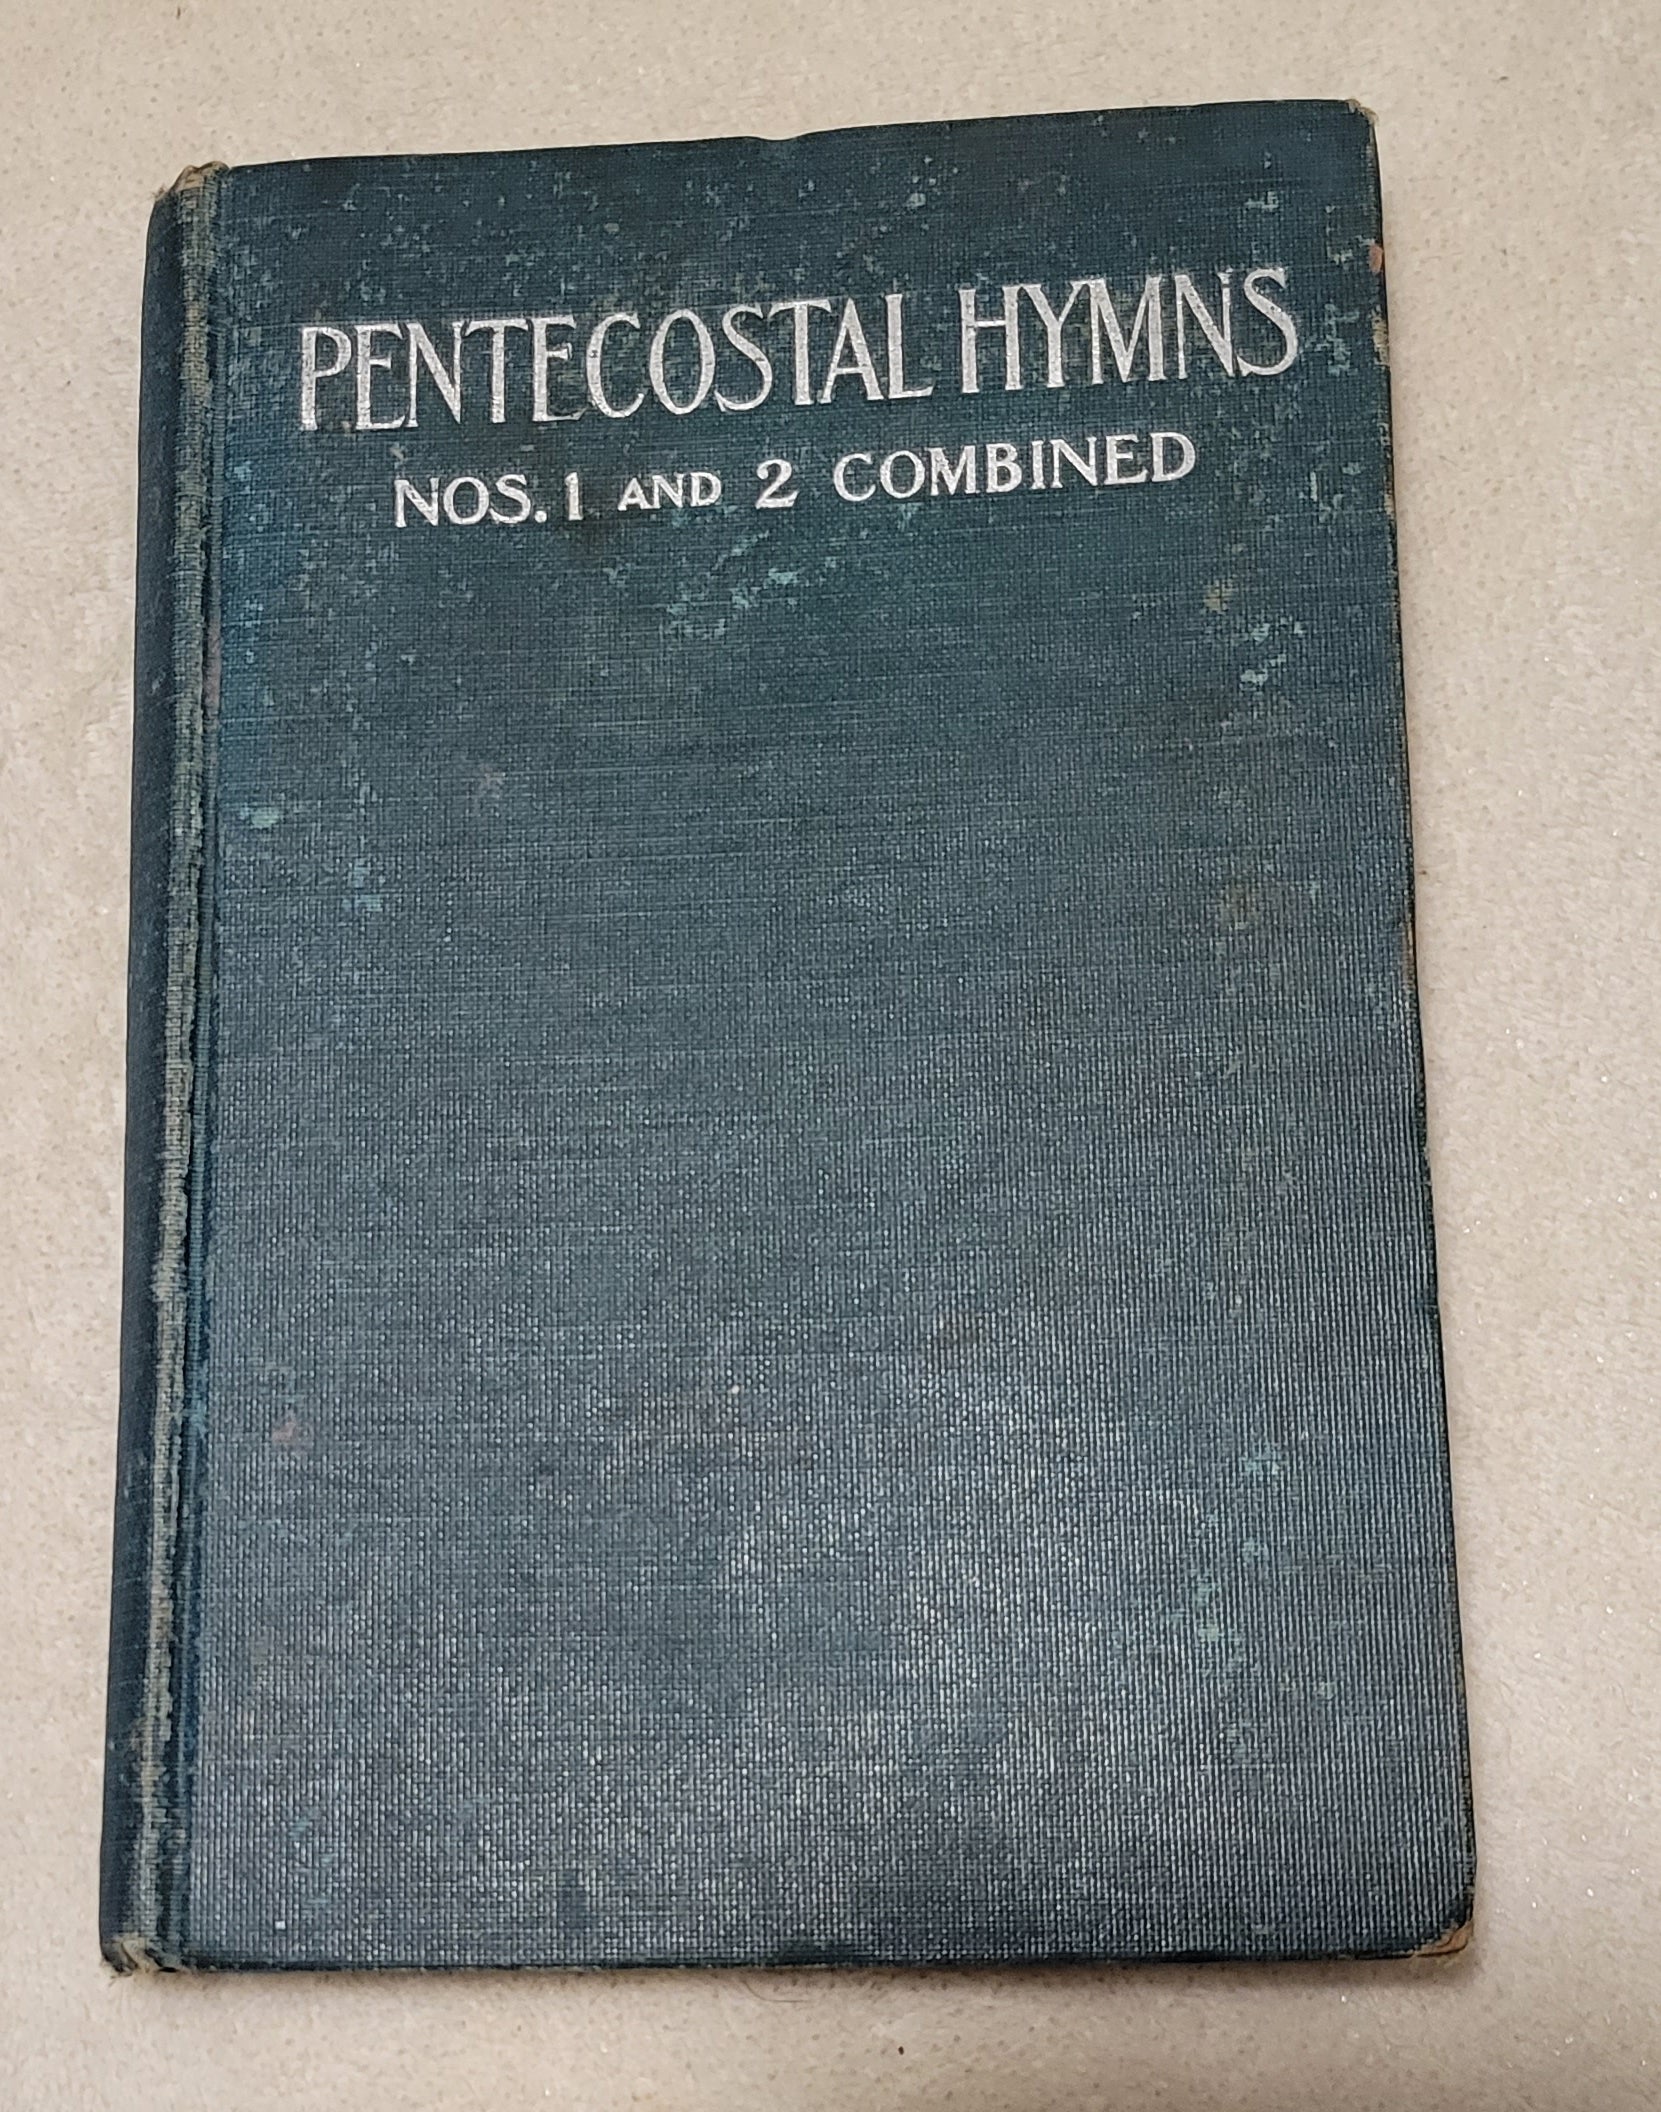 Vintage book for sale, Pentecostal hymns, published by Hope Publishing Company in Chicago. View of front cover.